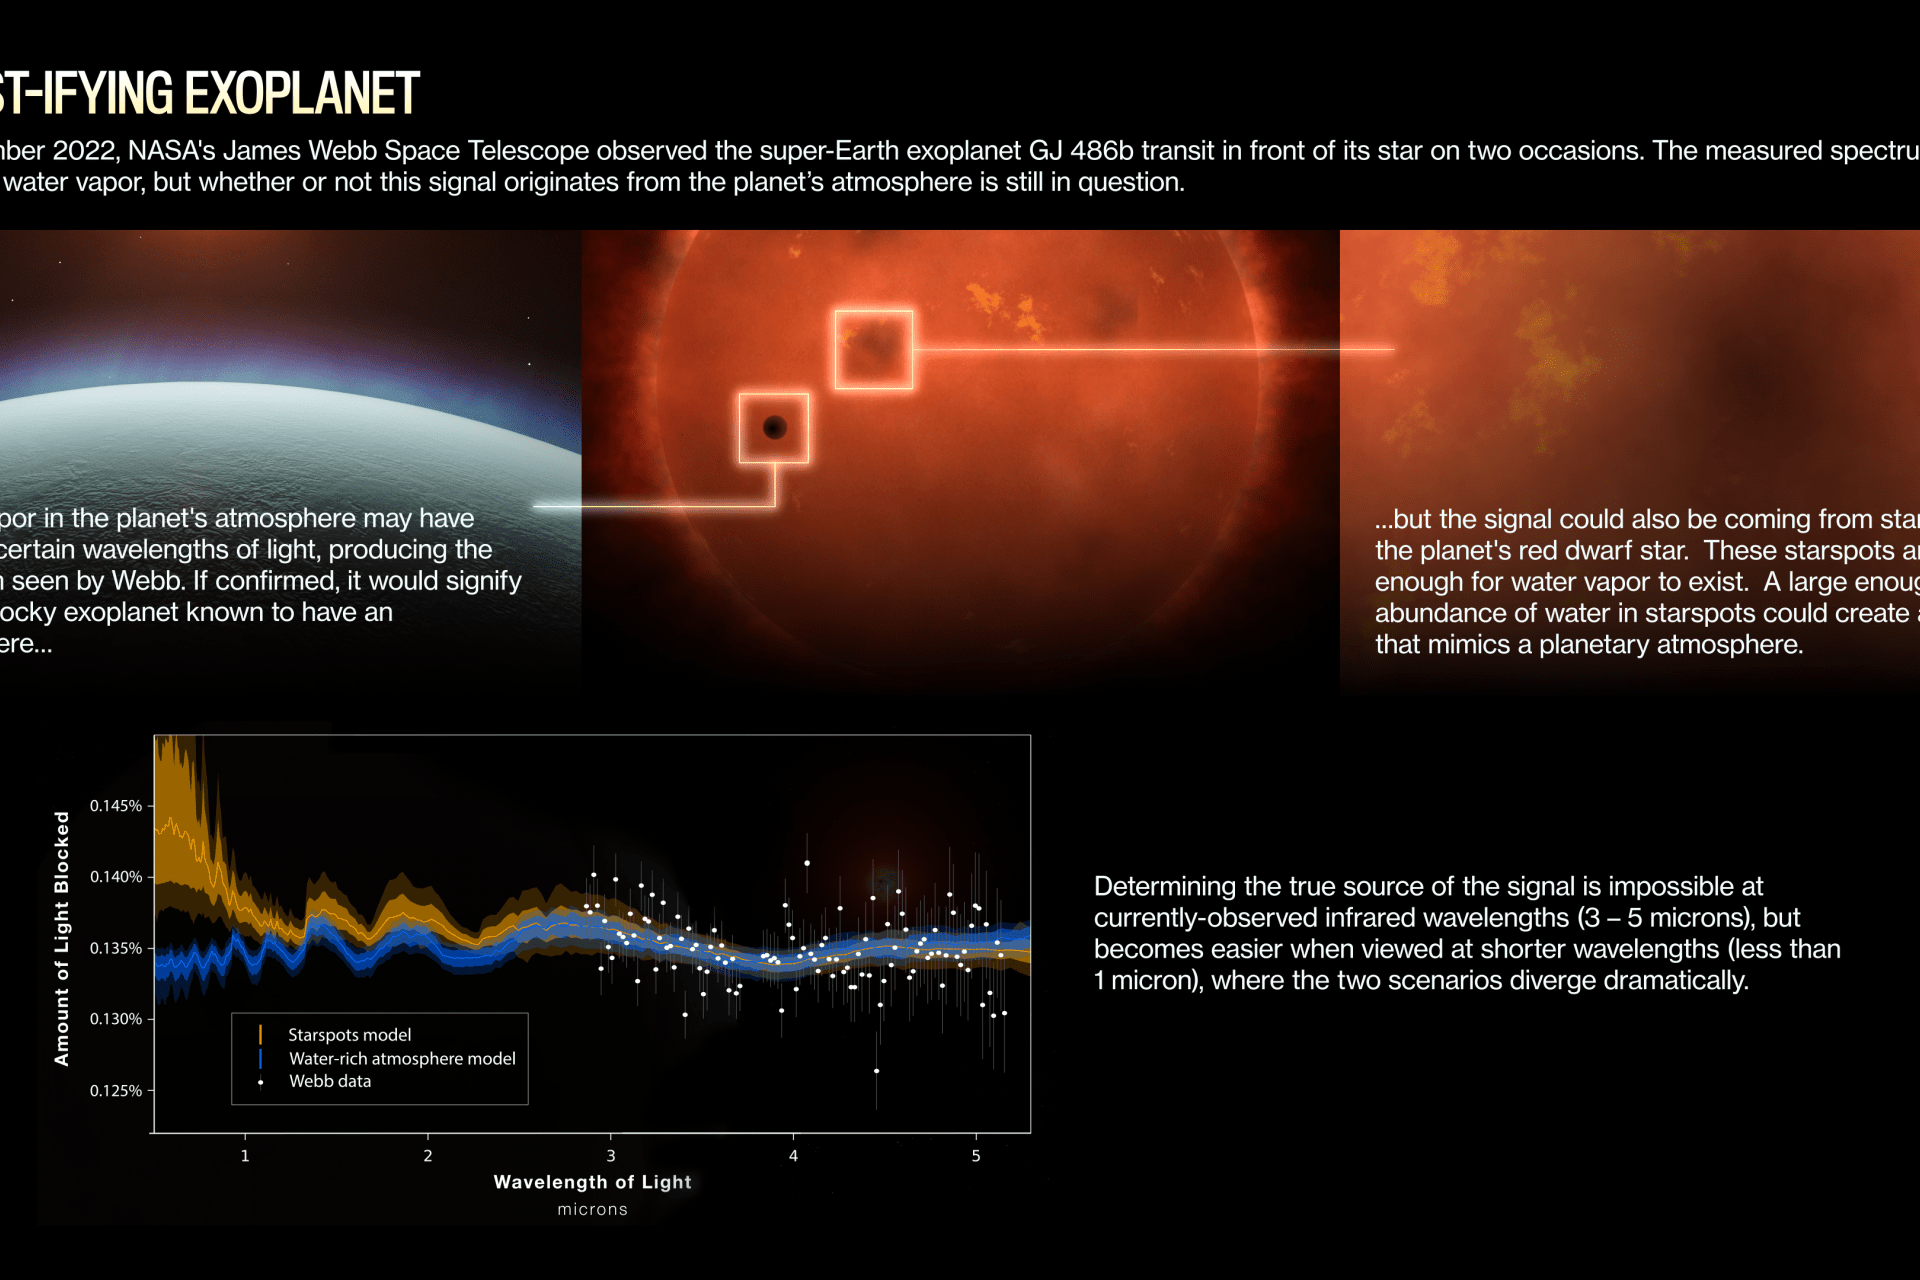 A graphic showing an exoplanet crossing in front of a red star. To the left, a box zooms in on the planet and explains how water vapor may be in the atmosphere of this rocky exoplanet GH 486 b. Another box on the right zooms in on a star spot and explains how water vapor can form there. A spectrum of light observed by Webb on the bottom shows how determining where the water vapor is coming from can be done by observing the planet in visible light.